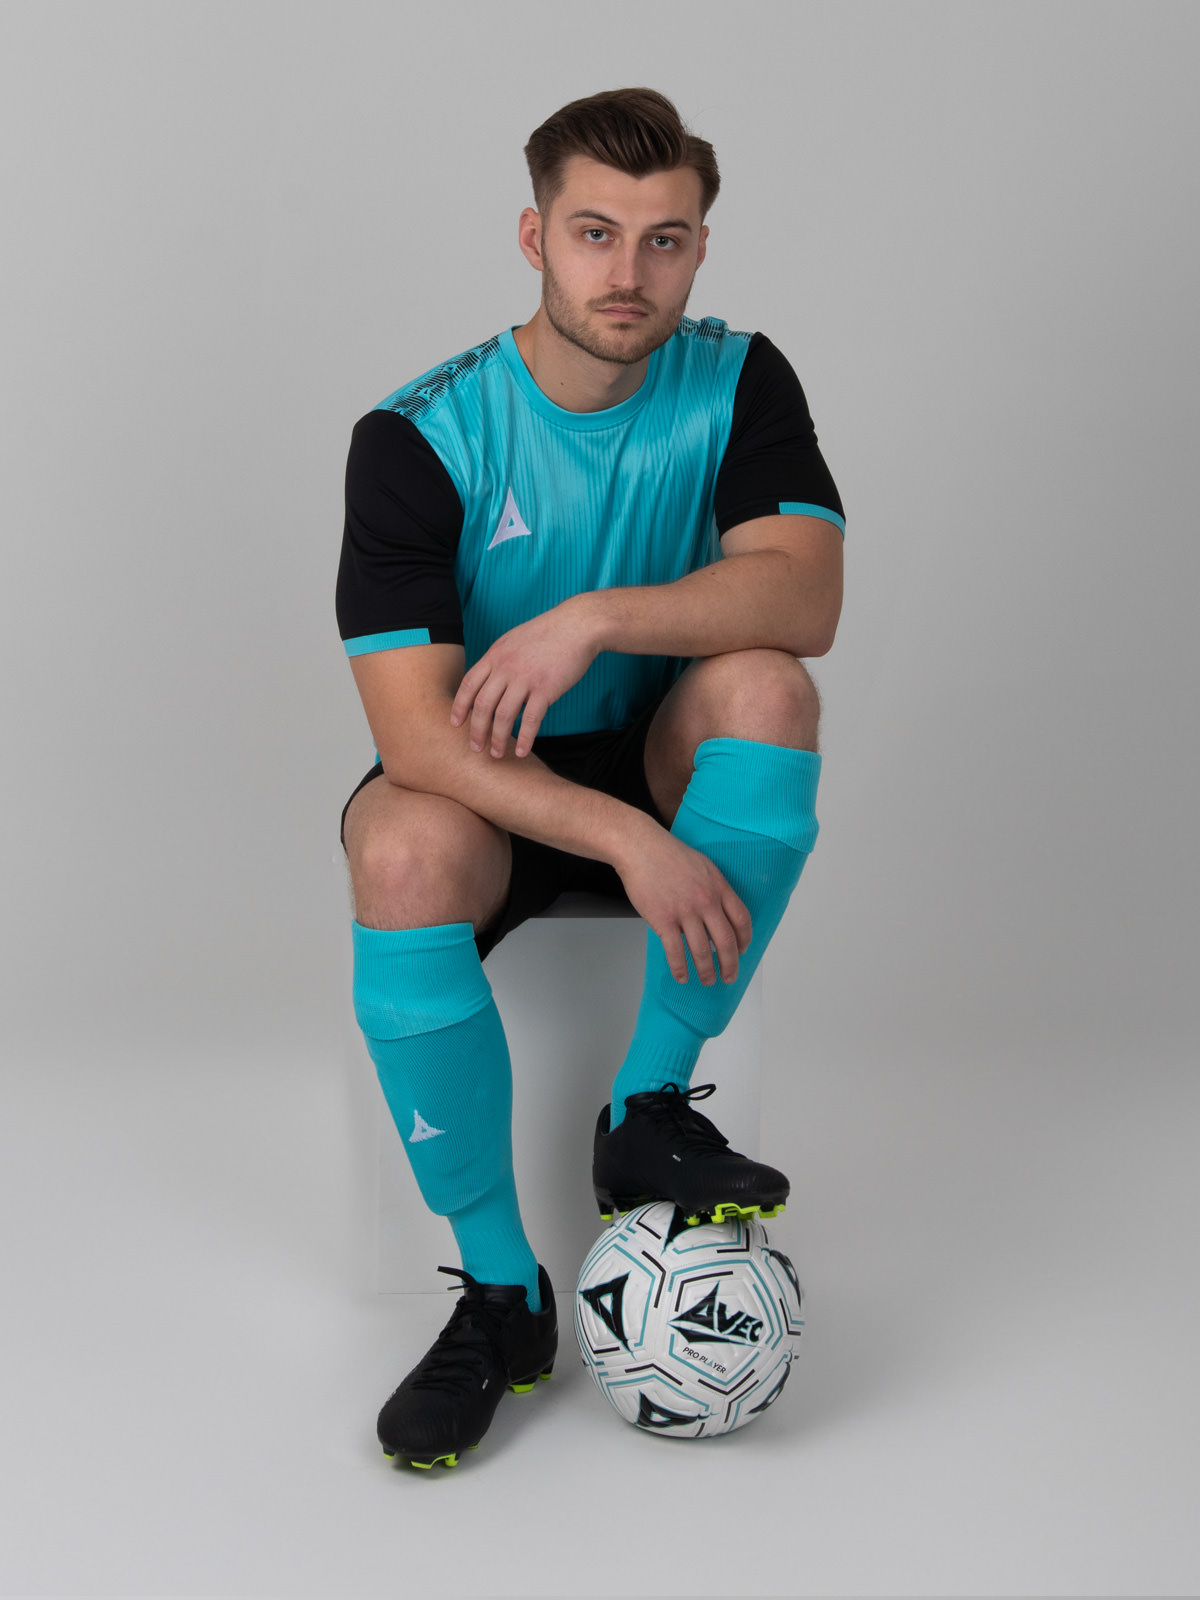 a model is sitting down posing in a light blue football shirt with black sleeves, black shorts and pale blue socks